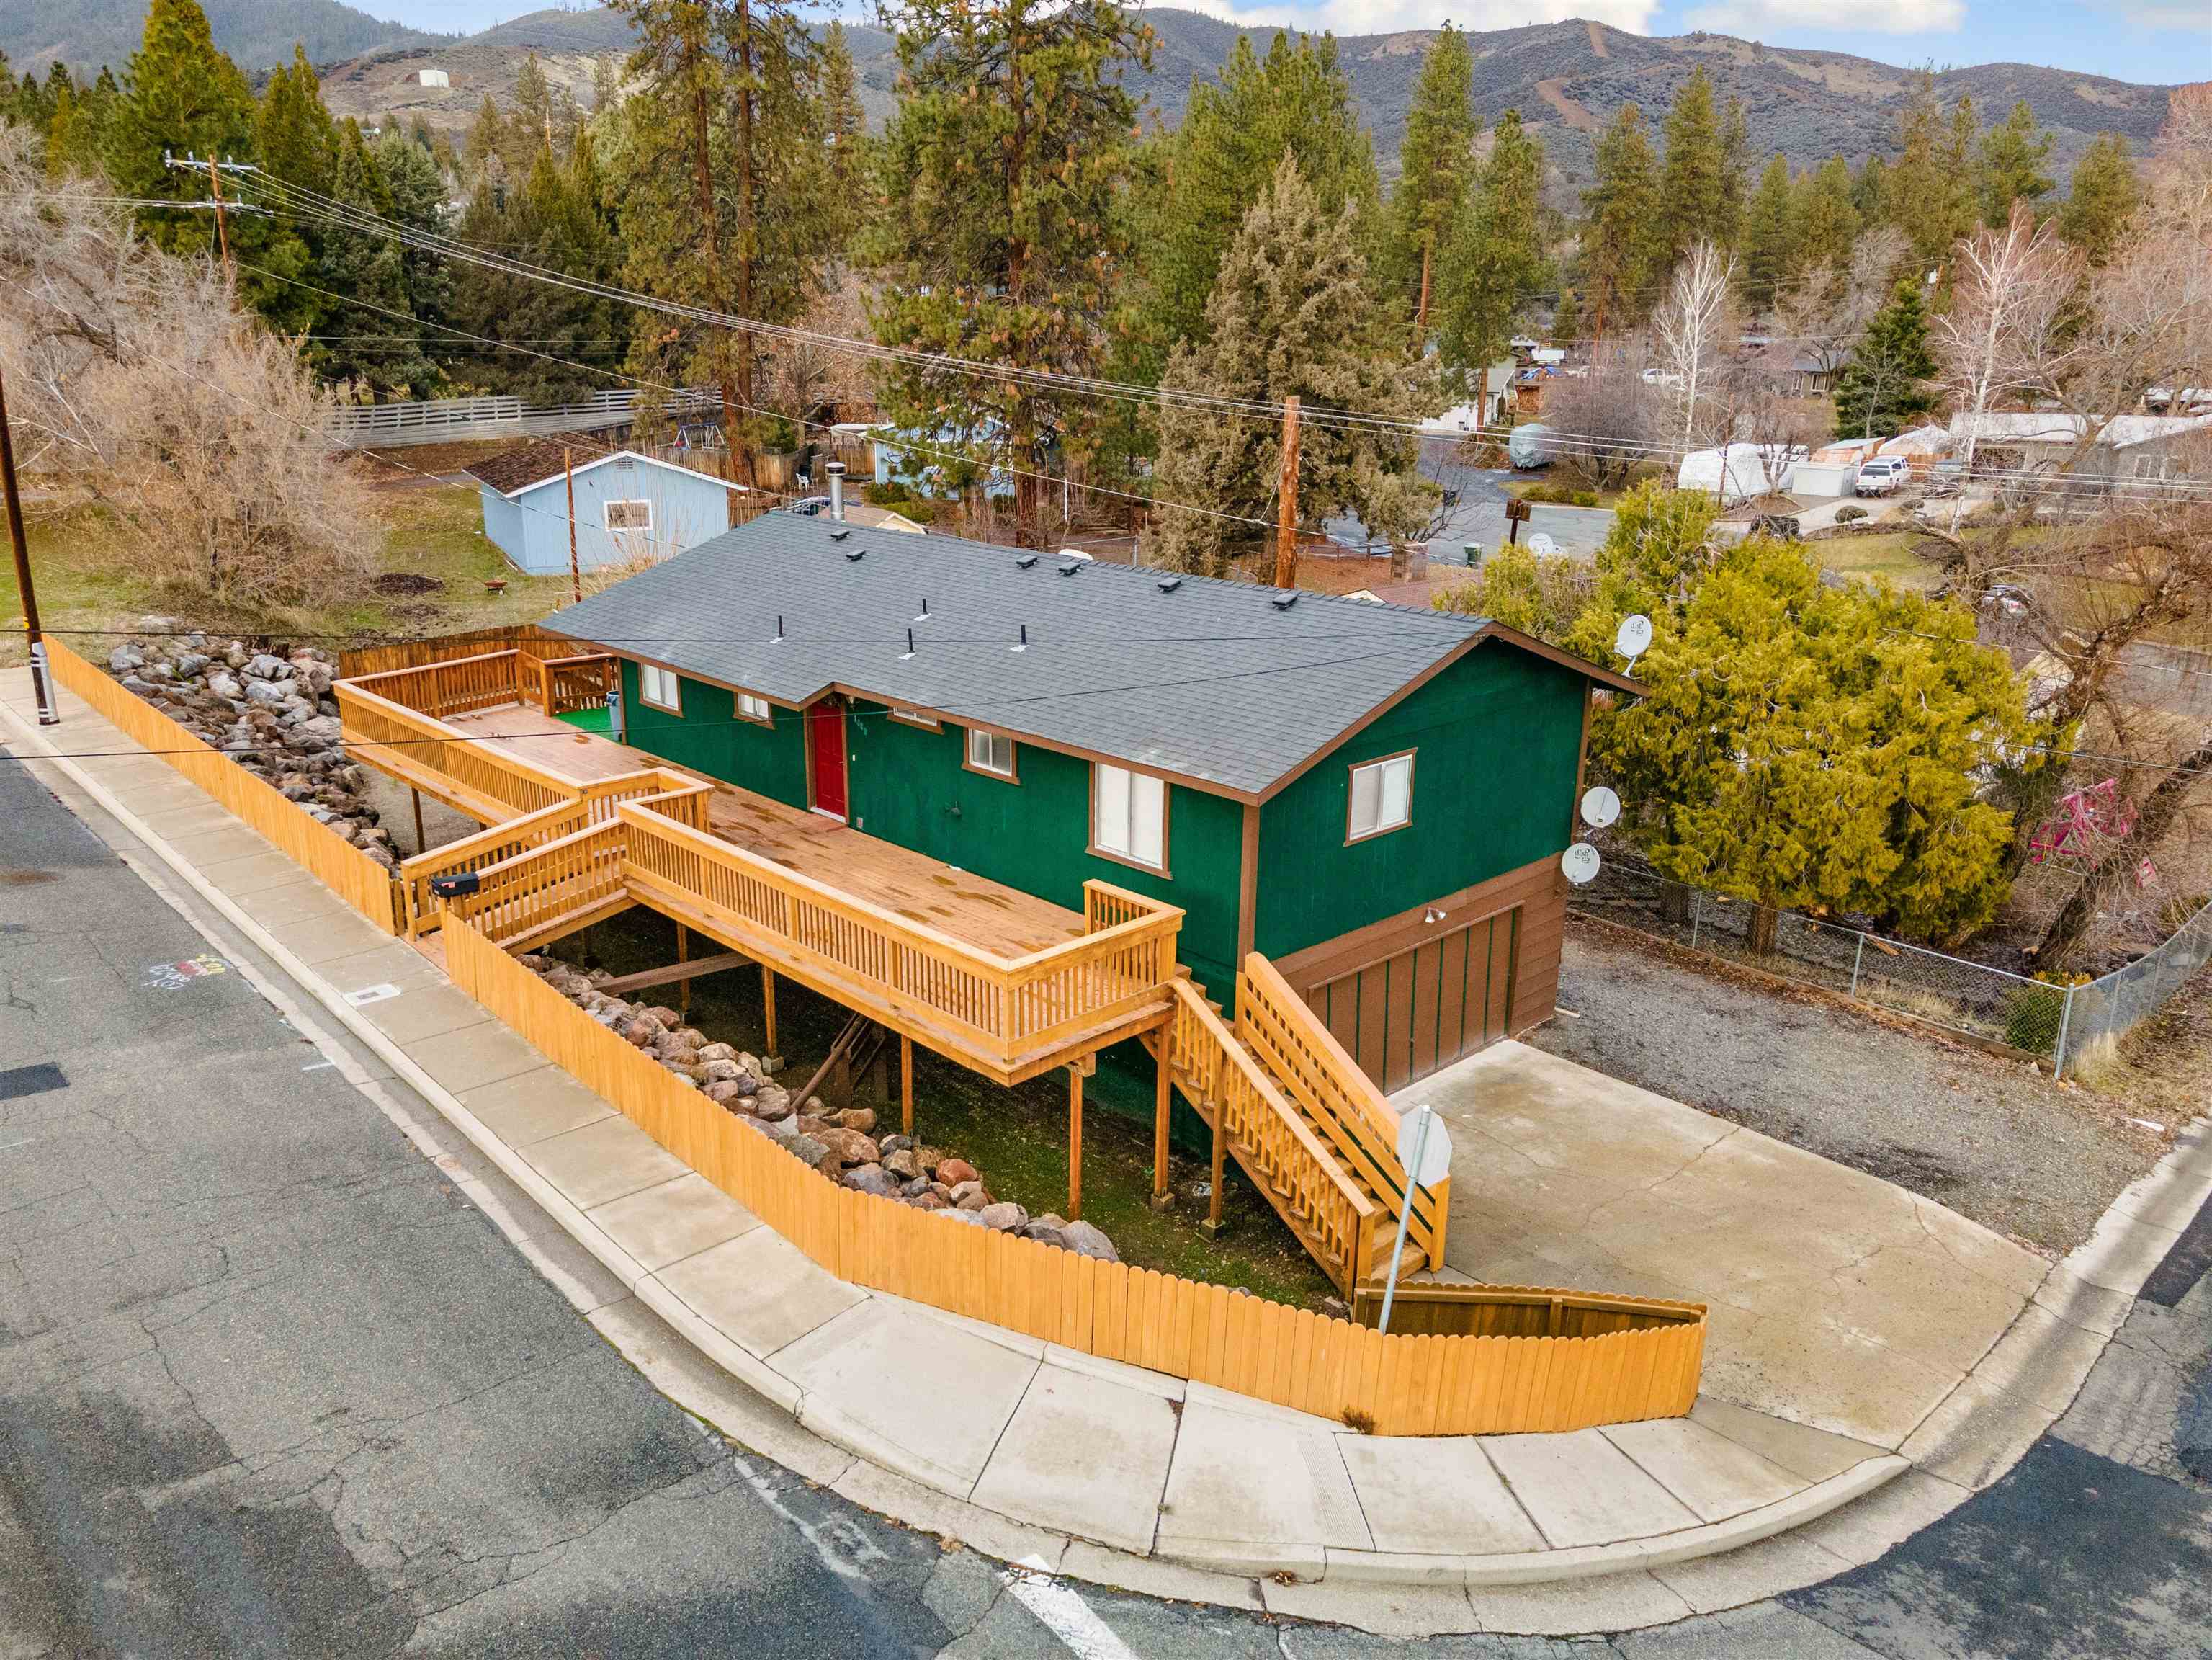 Newly refinished large deck with views of sunsets across the west mountains, makes this a very attractive outdoor space in this renovated Yreka Home! Recently updated throughout, butcher block counter tops in the kitchen, new cabinets, new bathrooms, fresh paint, new flooring makes this a bright and inviting place to call home! 3/2 1652 sqft includes a remodeled lower level that could be perfect for entertainment space or another living room! Located 1/2 a mile from historic downtown shopping and dining, close to schools. Easy to maintain fenced yard and great garage access on this corner lot! Motivated seller! Schedule a tour today!  The accuracy of the information provided is deemed reliable but is not guaranteed, buyer to verify all information provided.